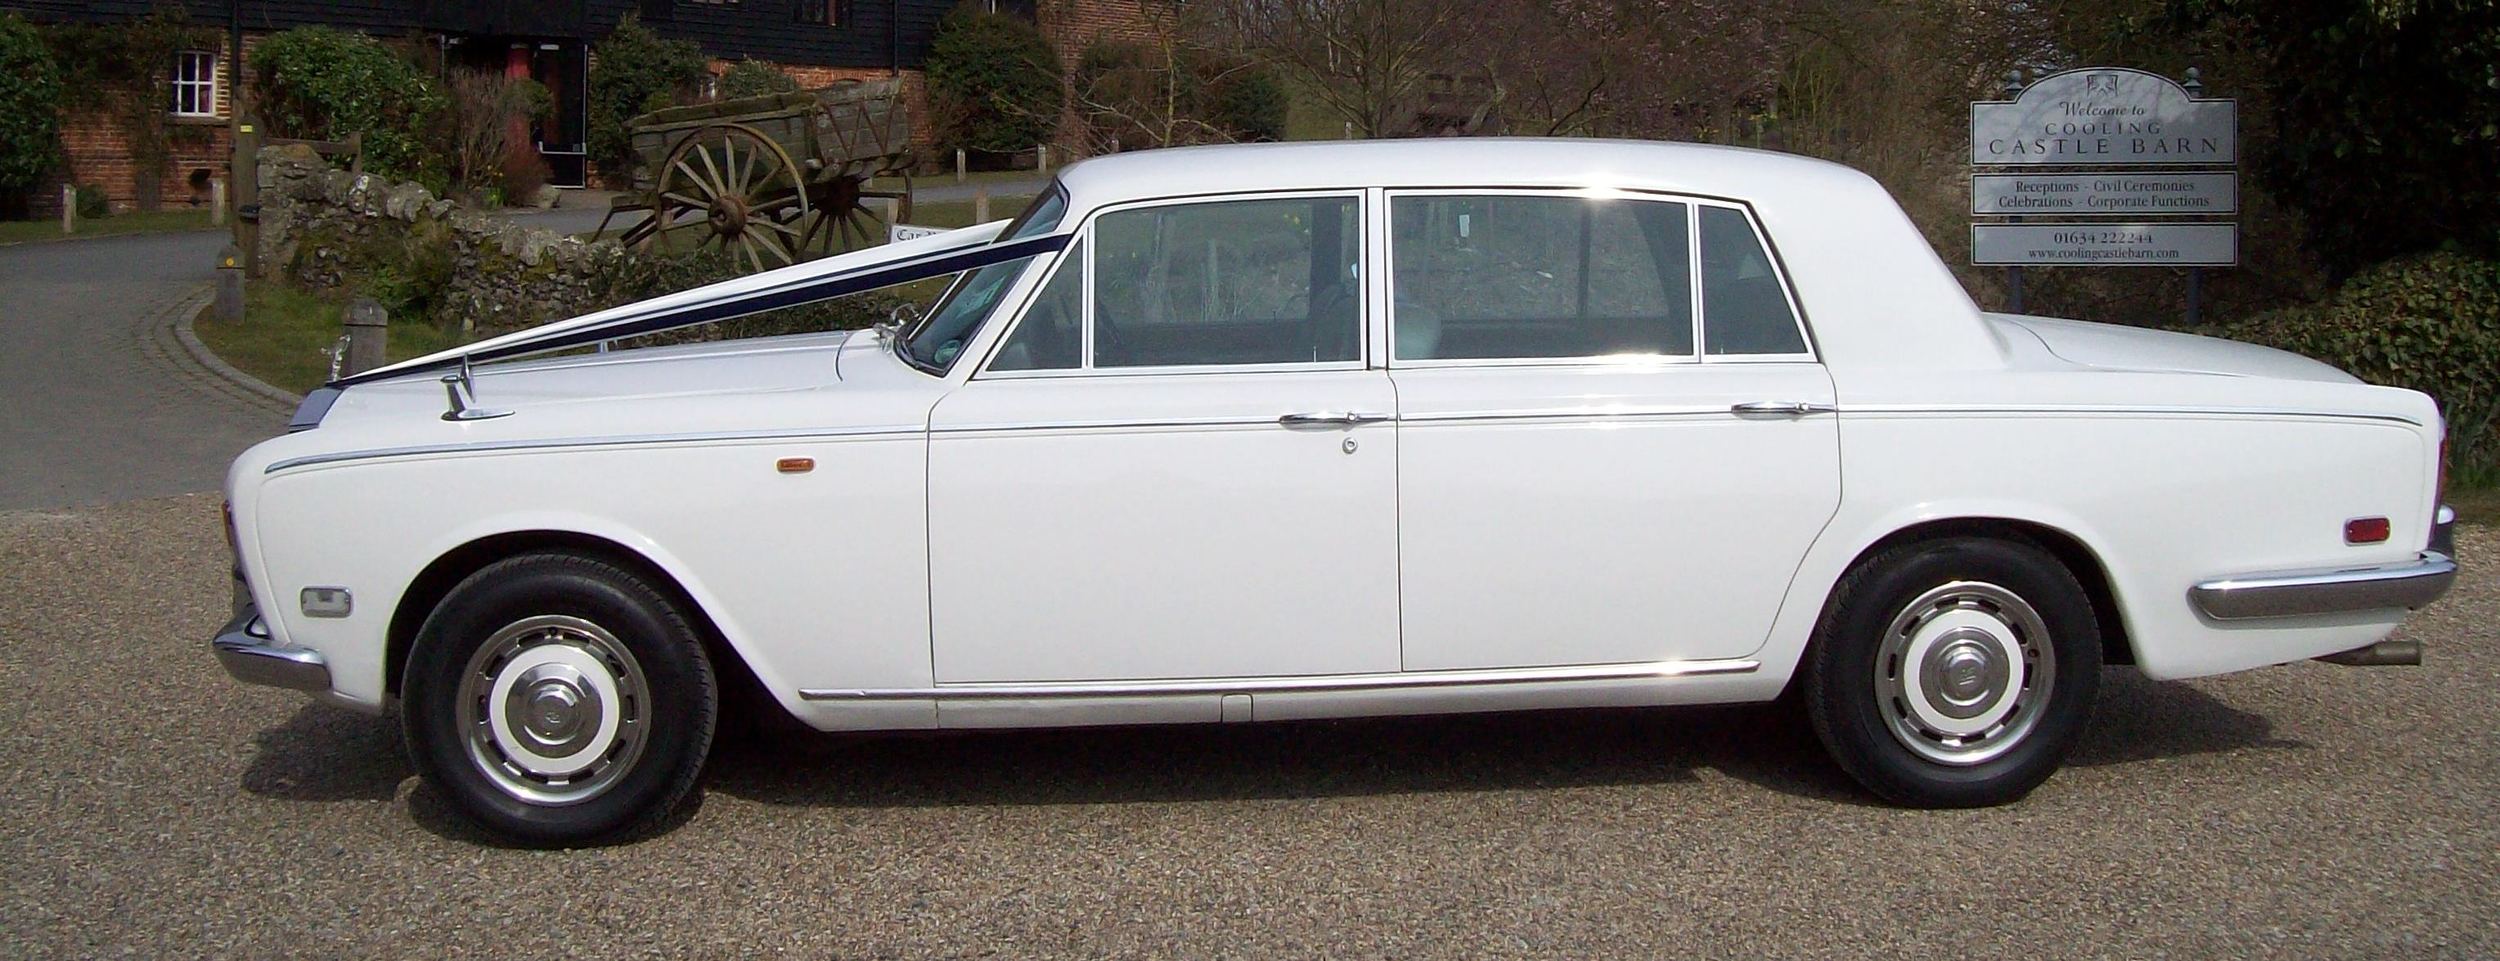 White Rolls Royce Silver Shadow Limousine Kent Medway Wedding Cars